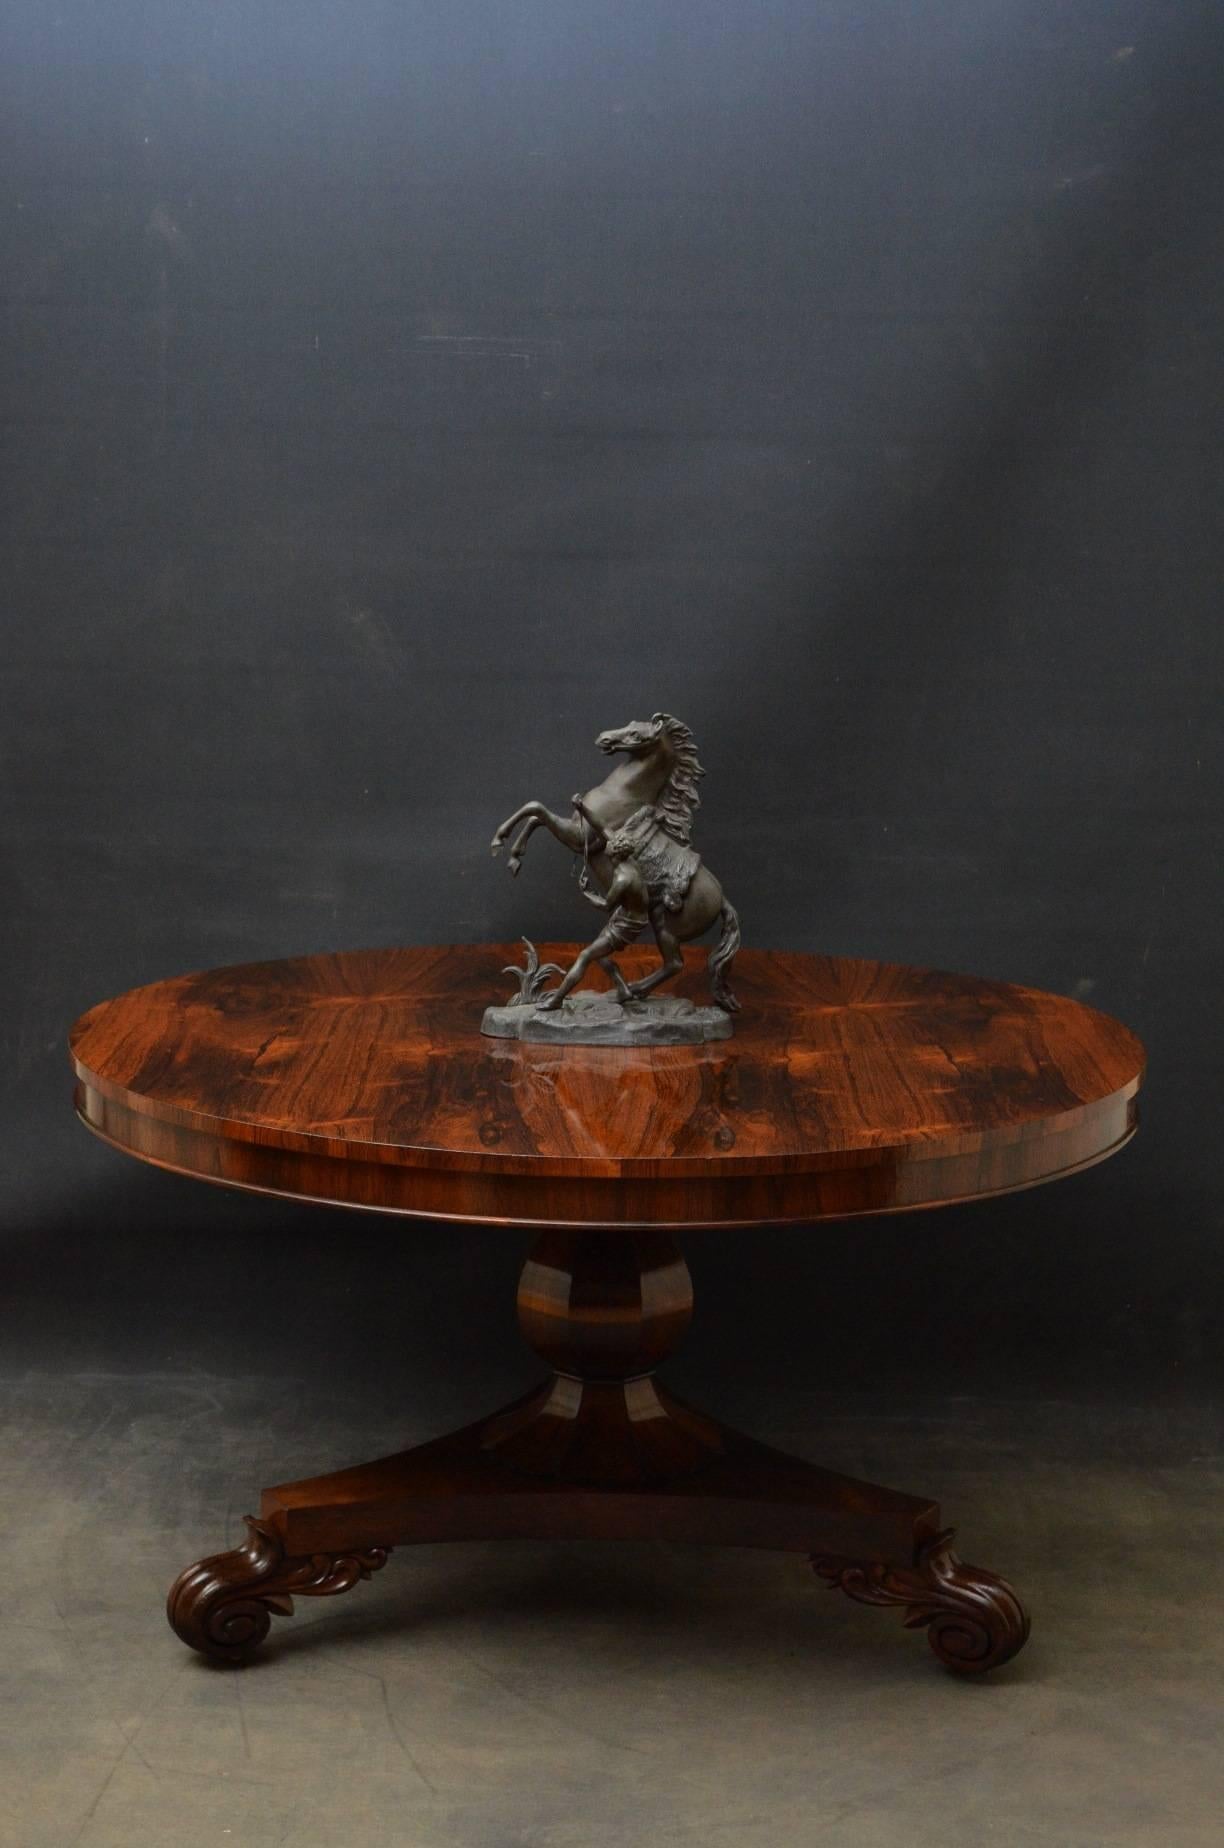 Sn3690 stunning William IV tilt-top dining table or centre table in rosewood, having stunning top raised on flat faceted vase shaped column with carved collar terminating in trefoil base, carved scroll feet and castors. This is an exceptional dining